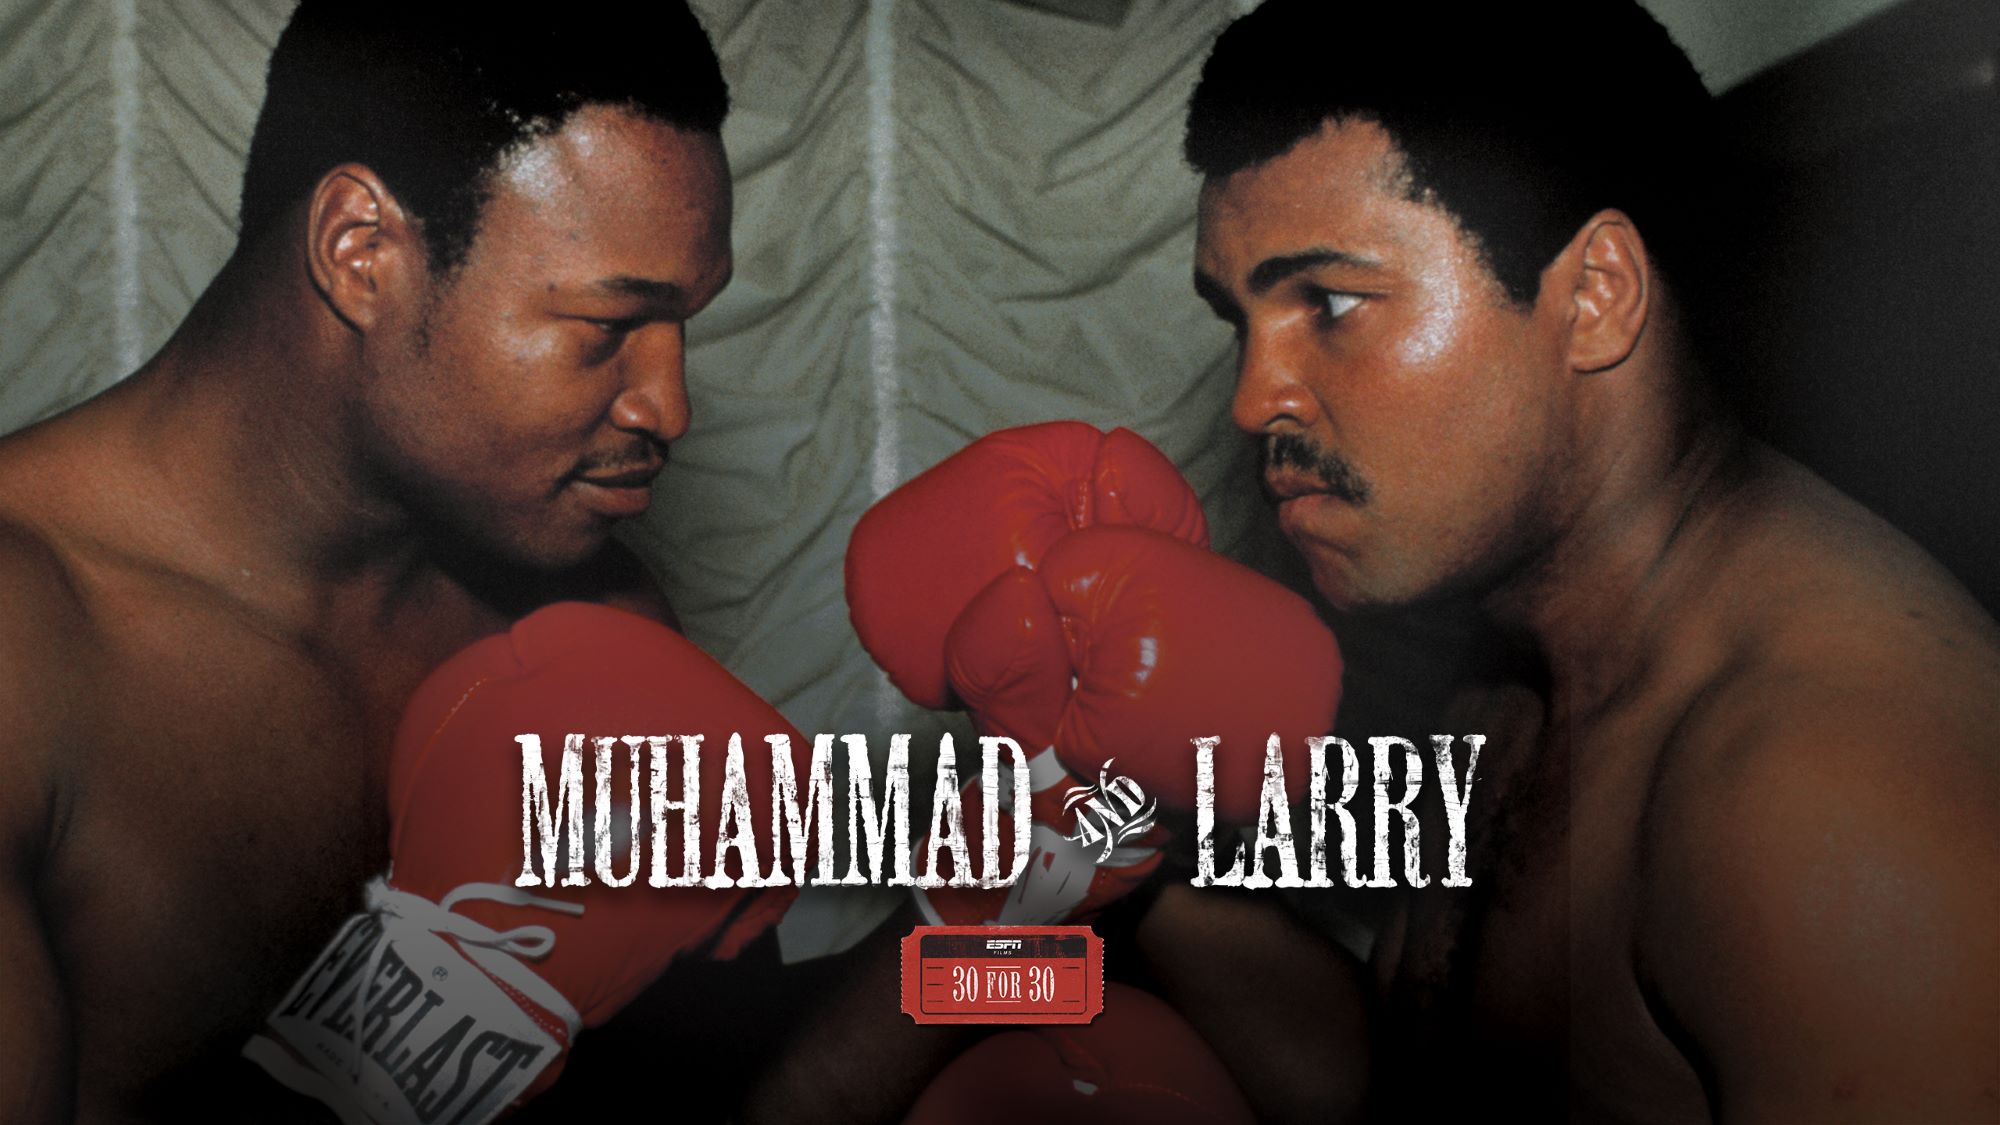 Muhammad and Larry - Muhammad and Larry